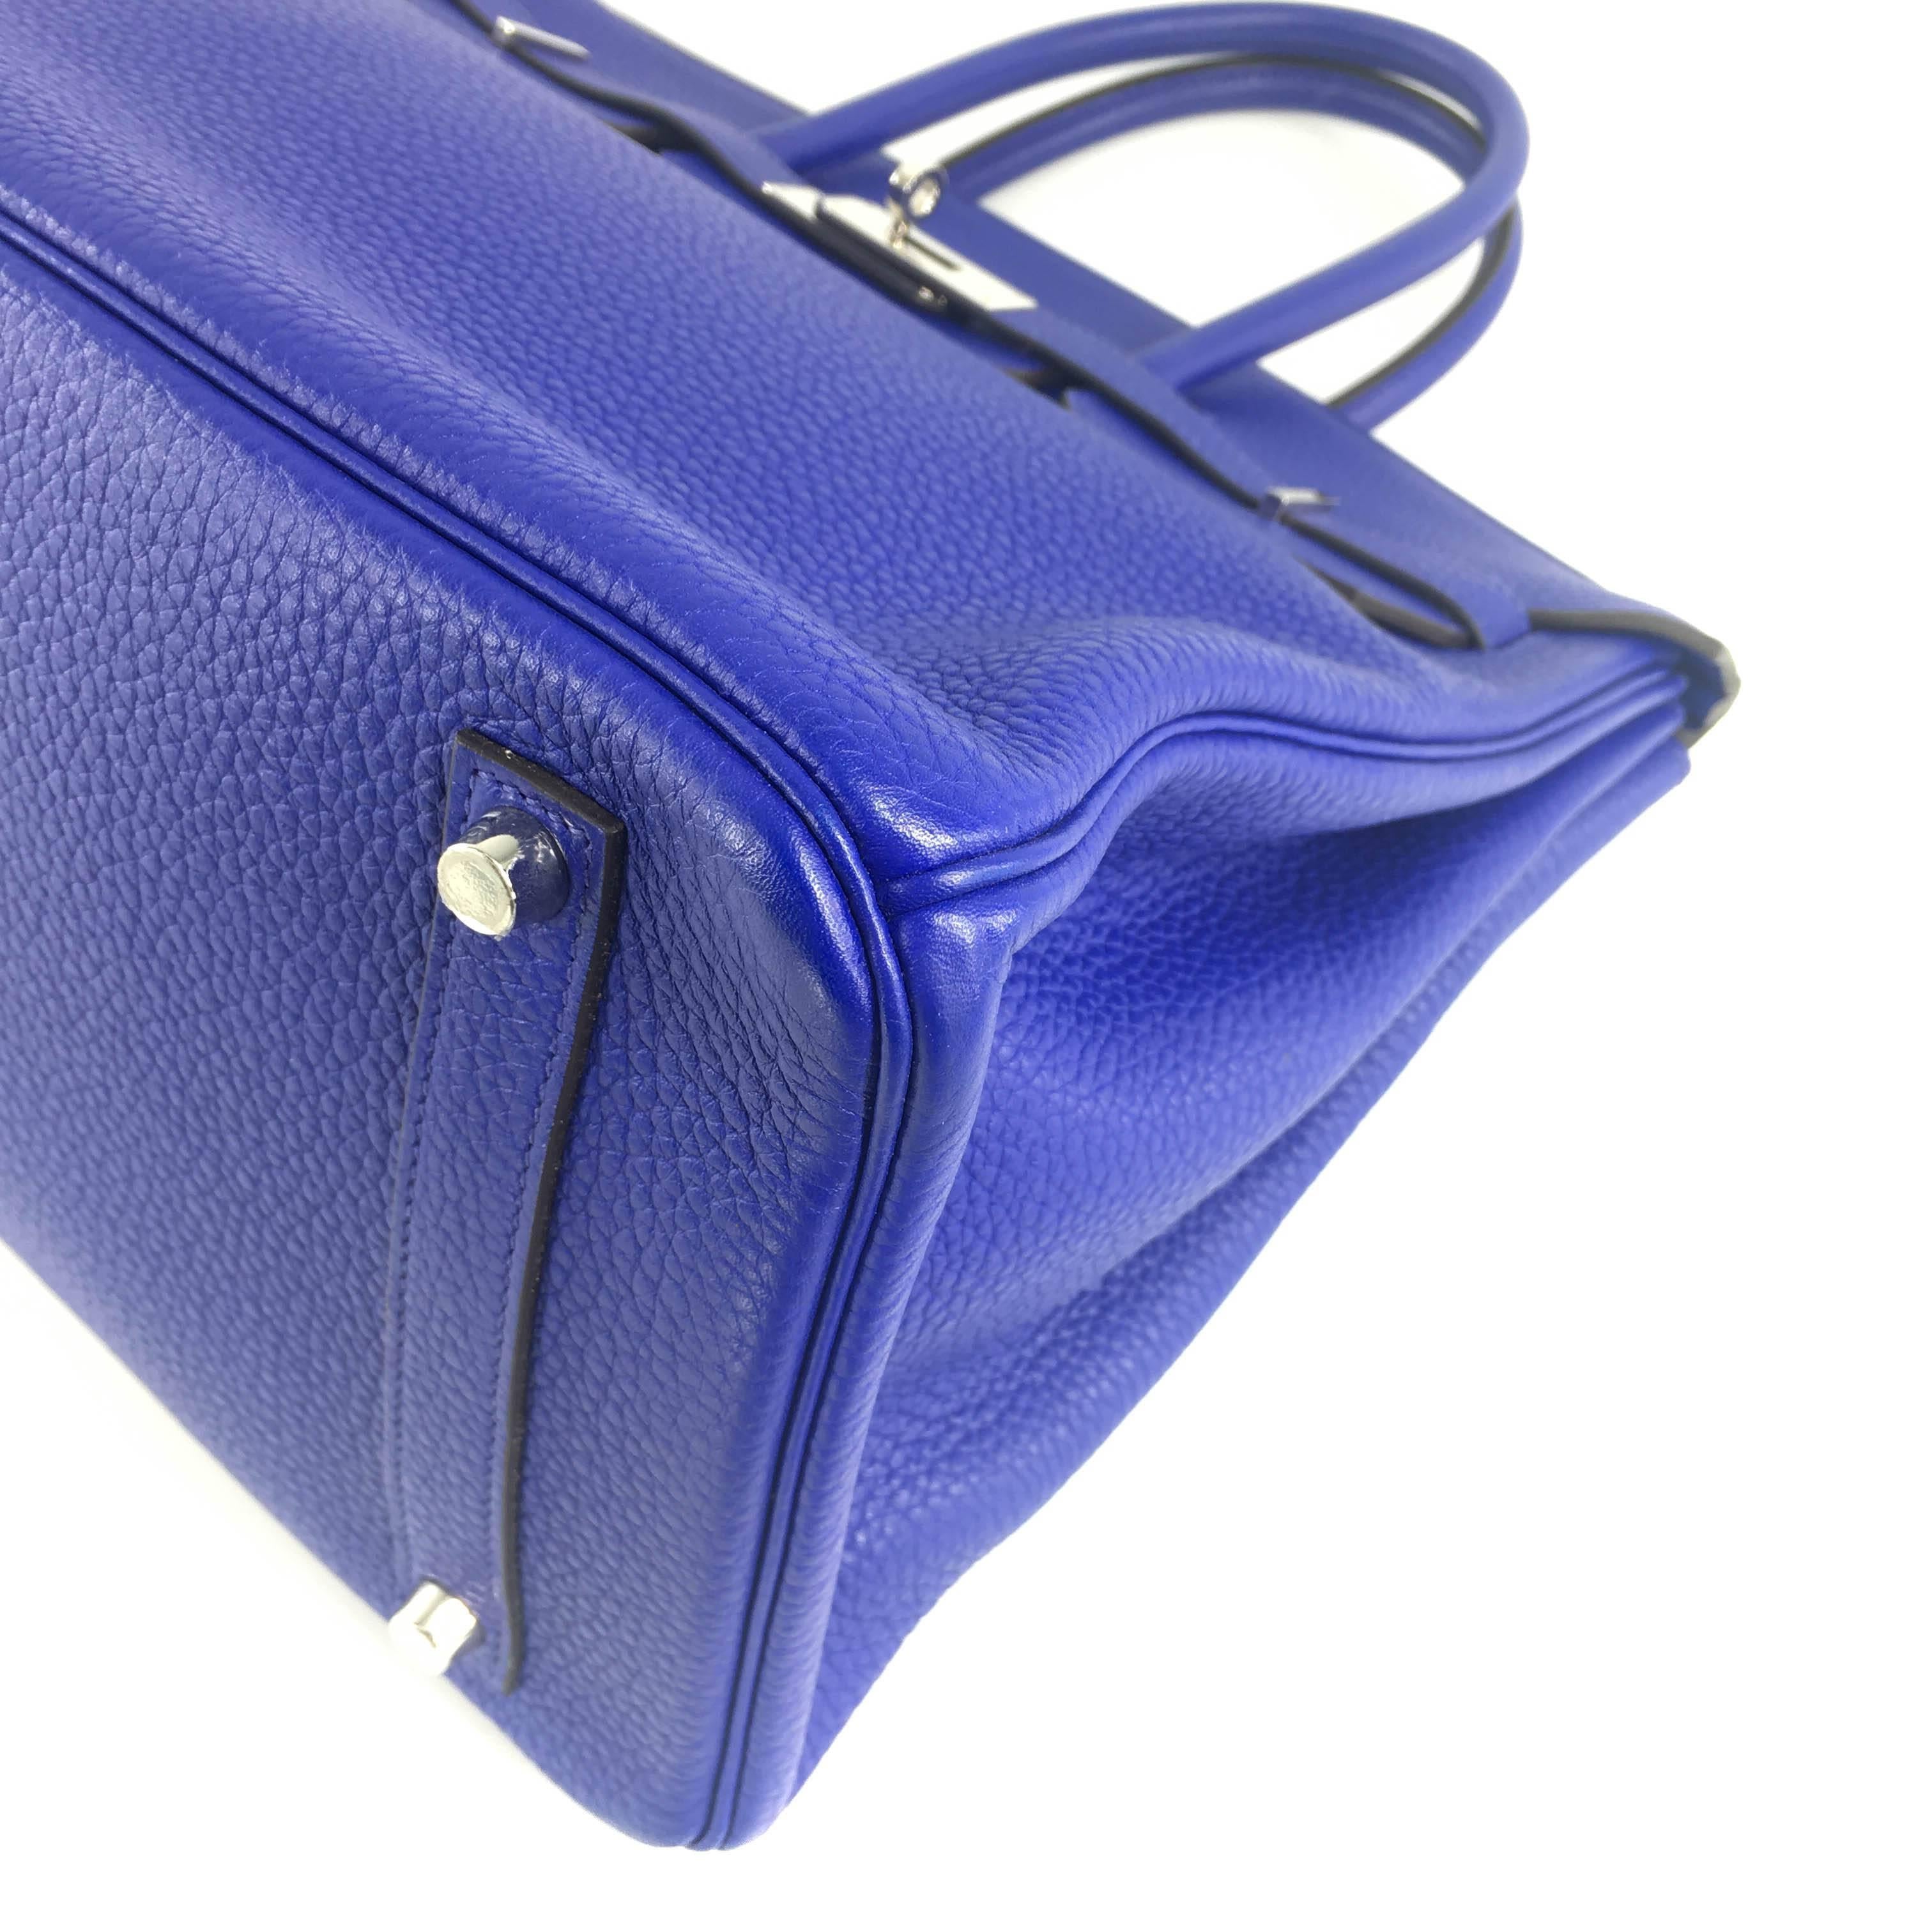 Hermes Birkin 35 Togo leather Blue Electric PHW For Sale 4